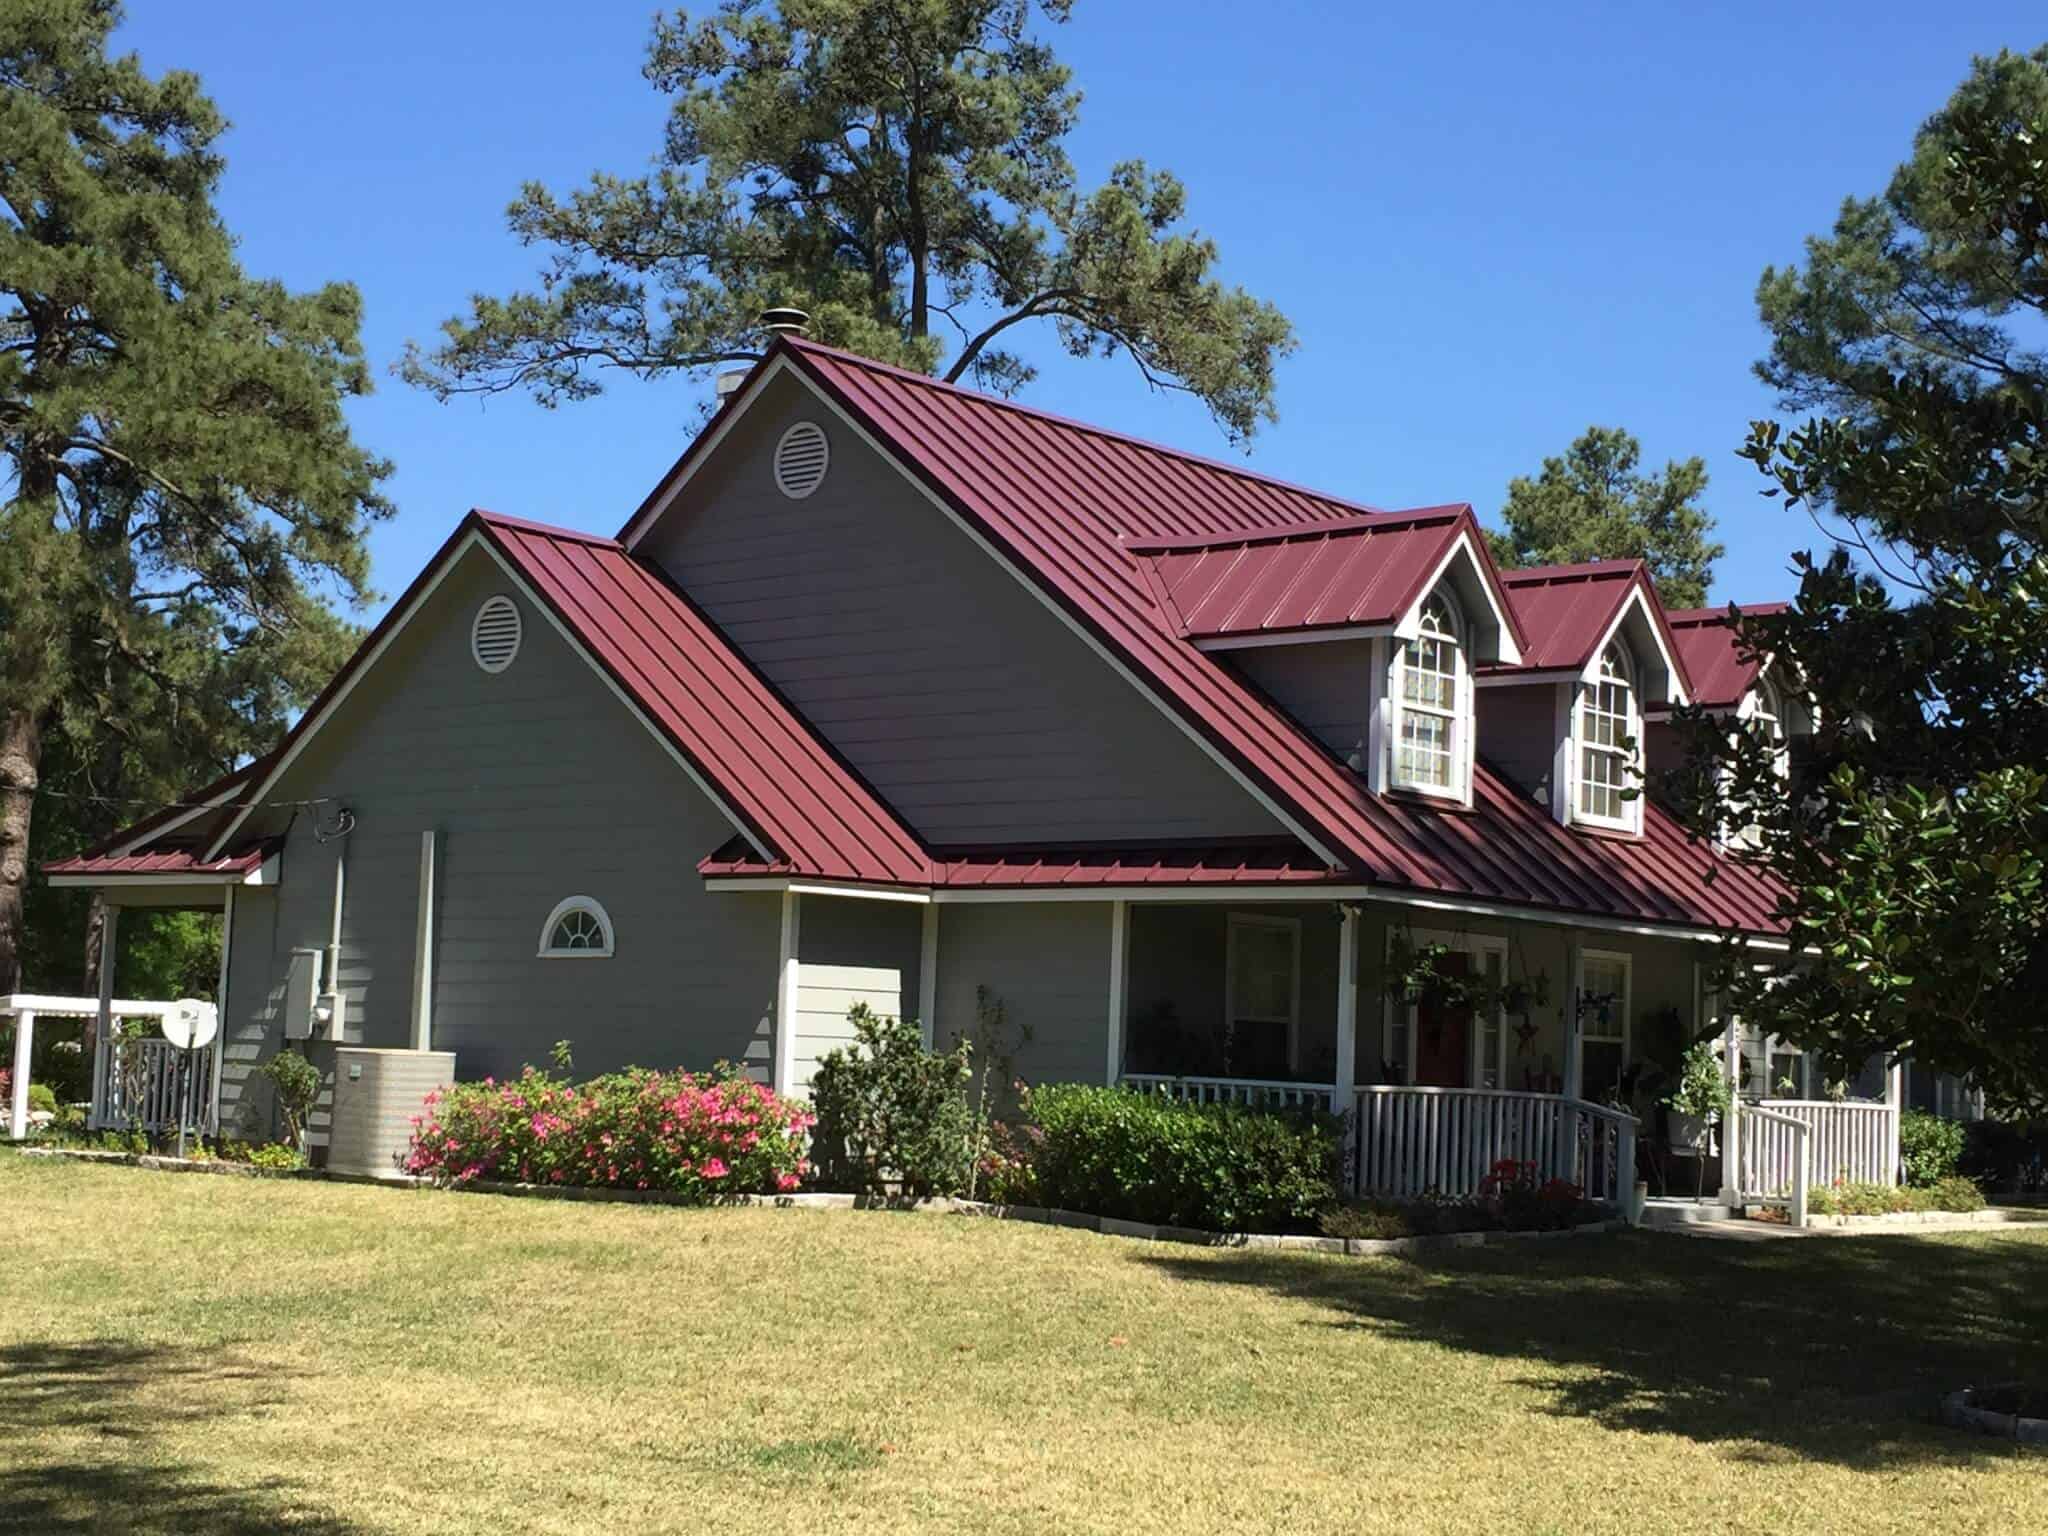 Pearland TX Metal Roofing Supply